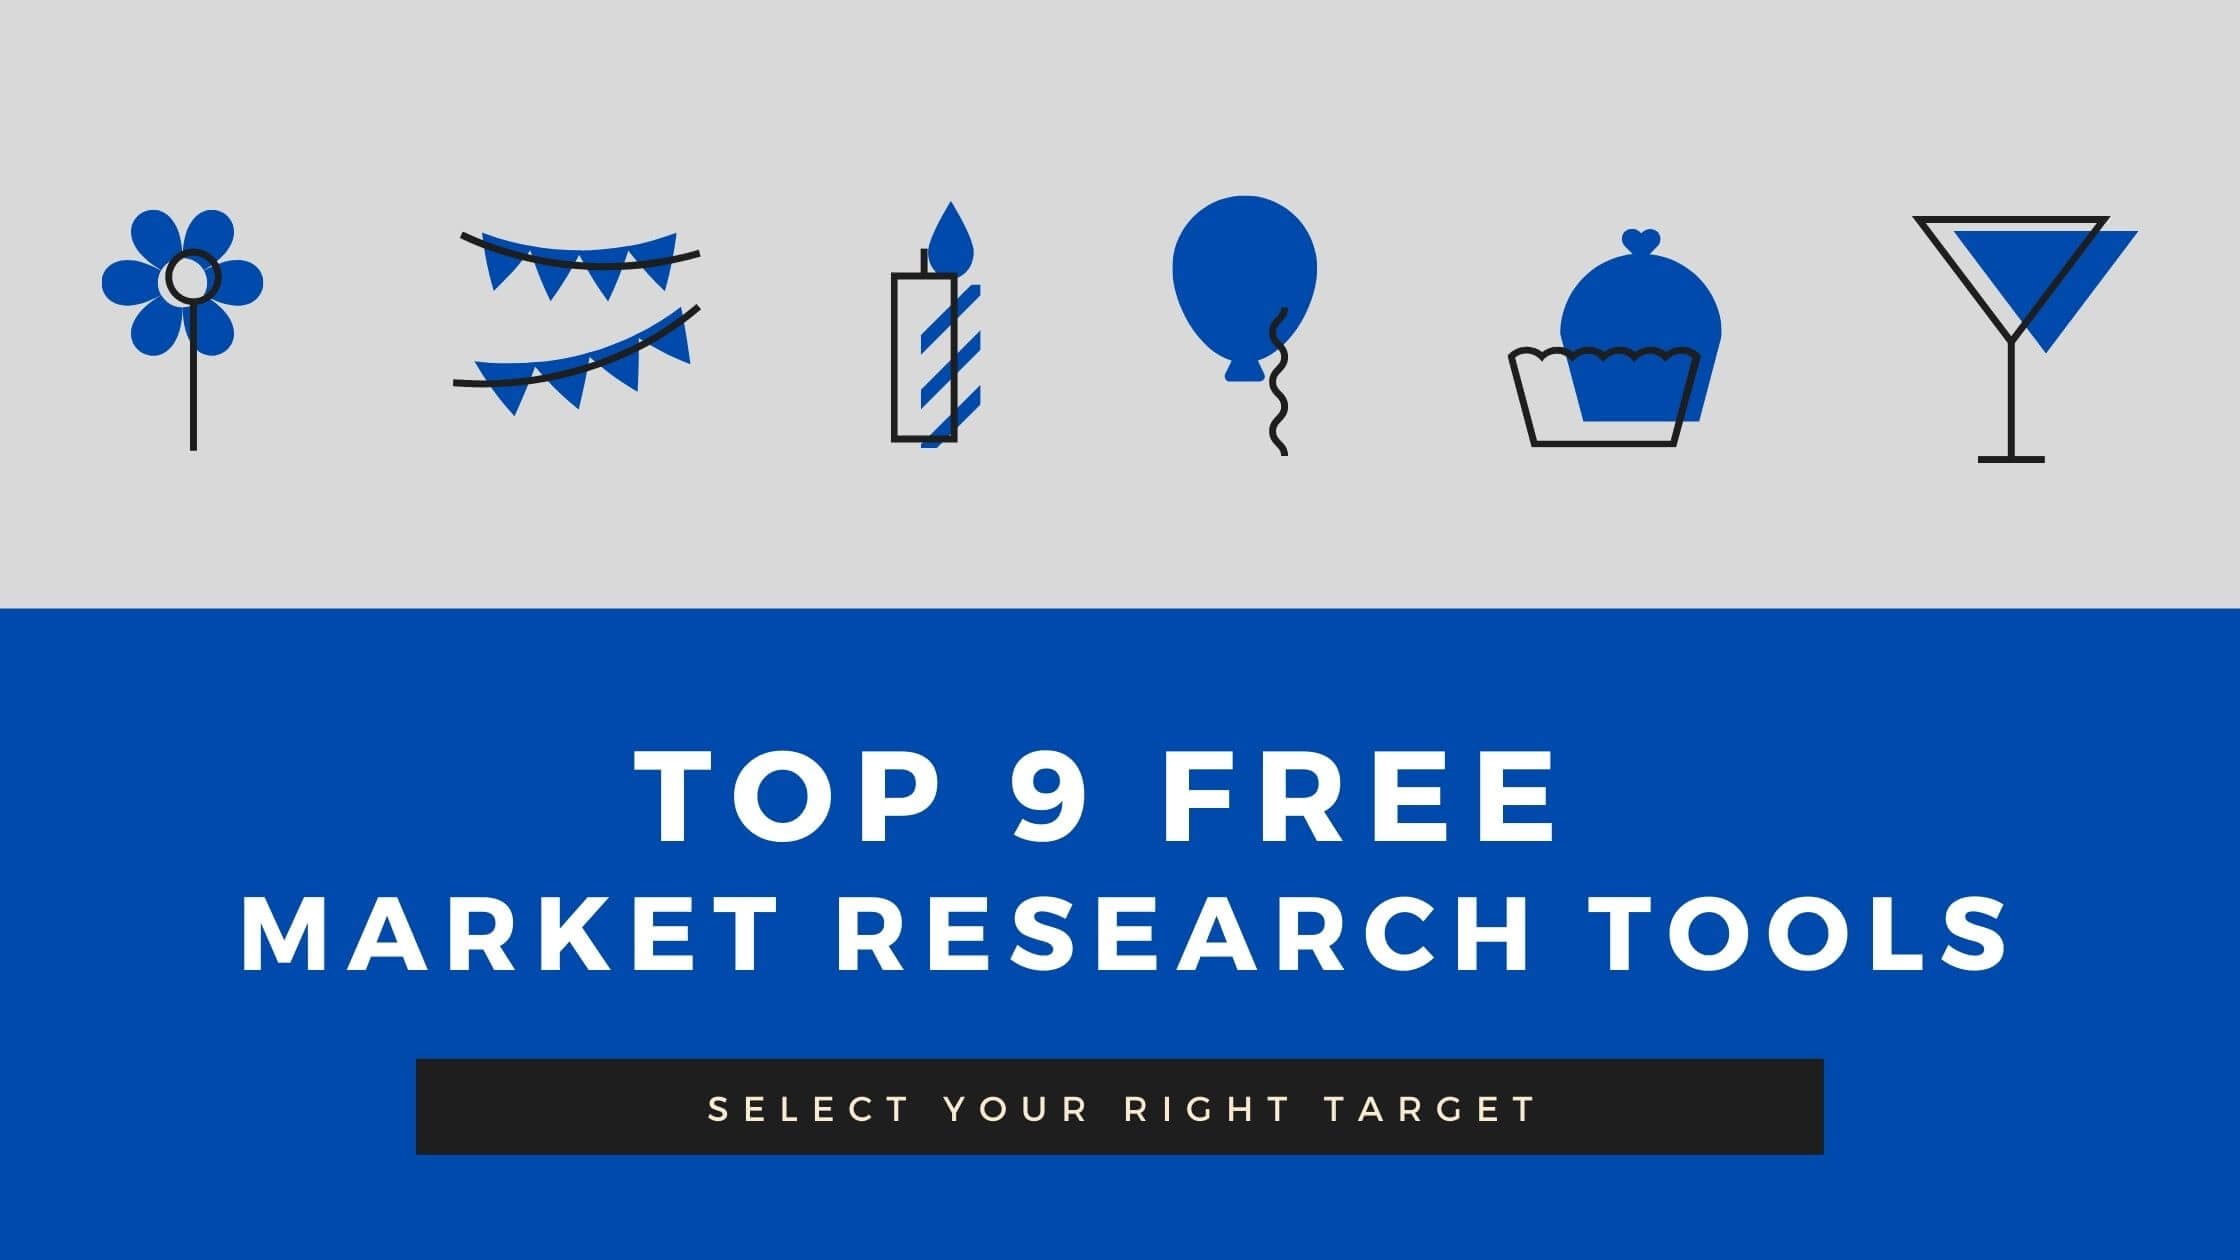 Market Research Tools